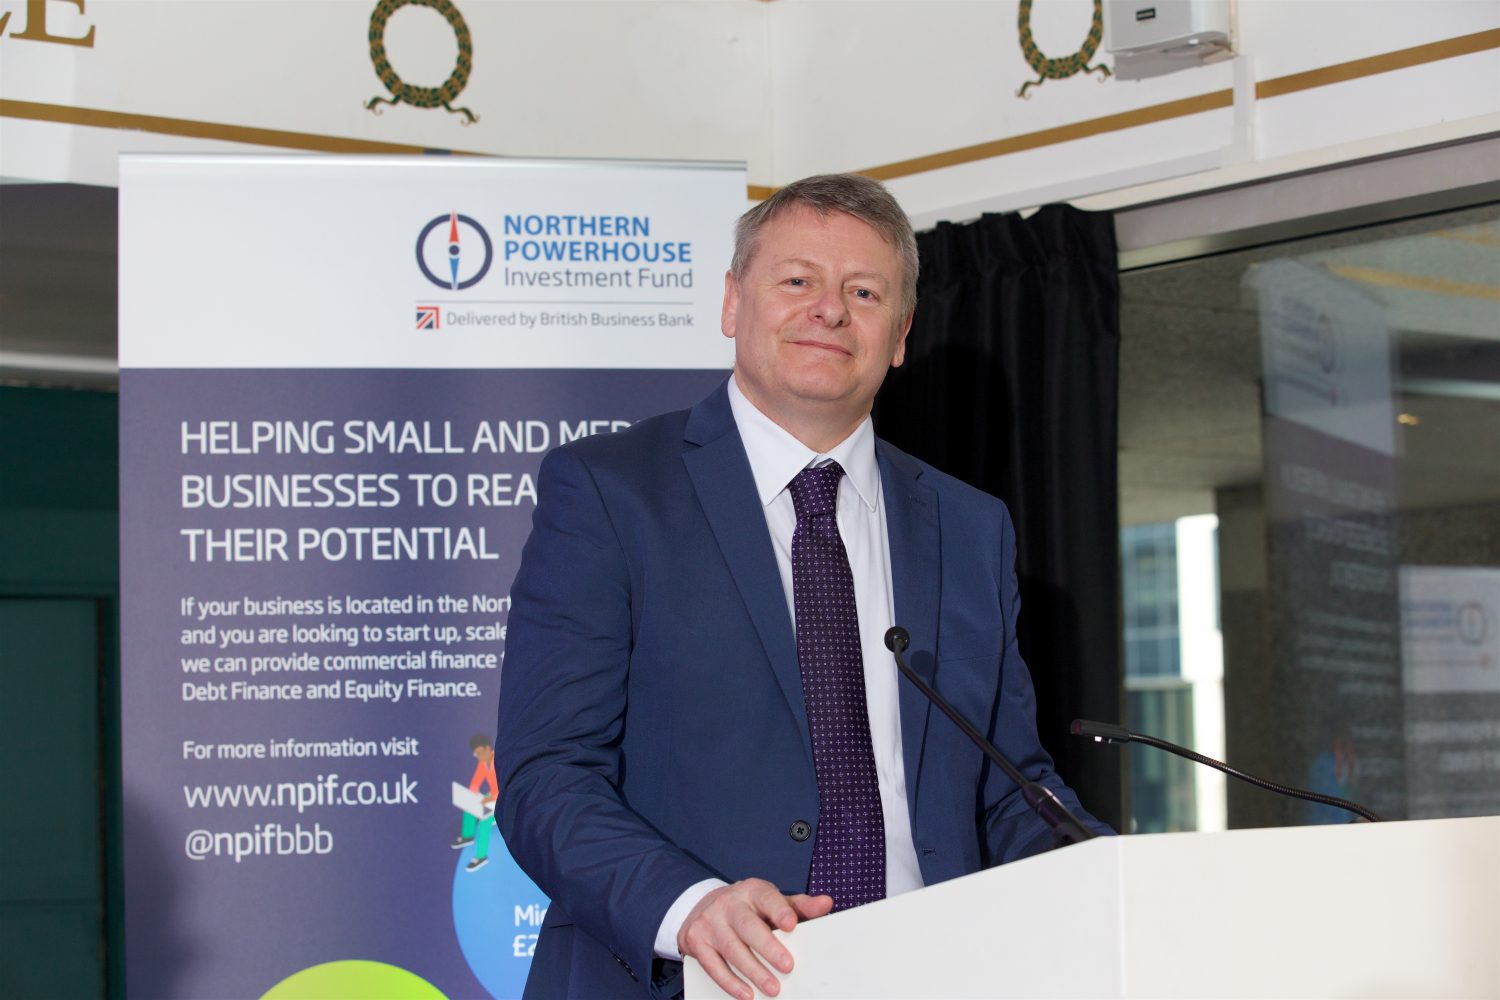 Grant Peggie, director at British Business Bank, at the launch of the Northern Powerhouse